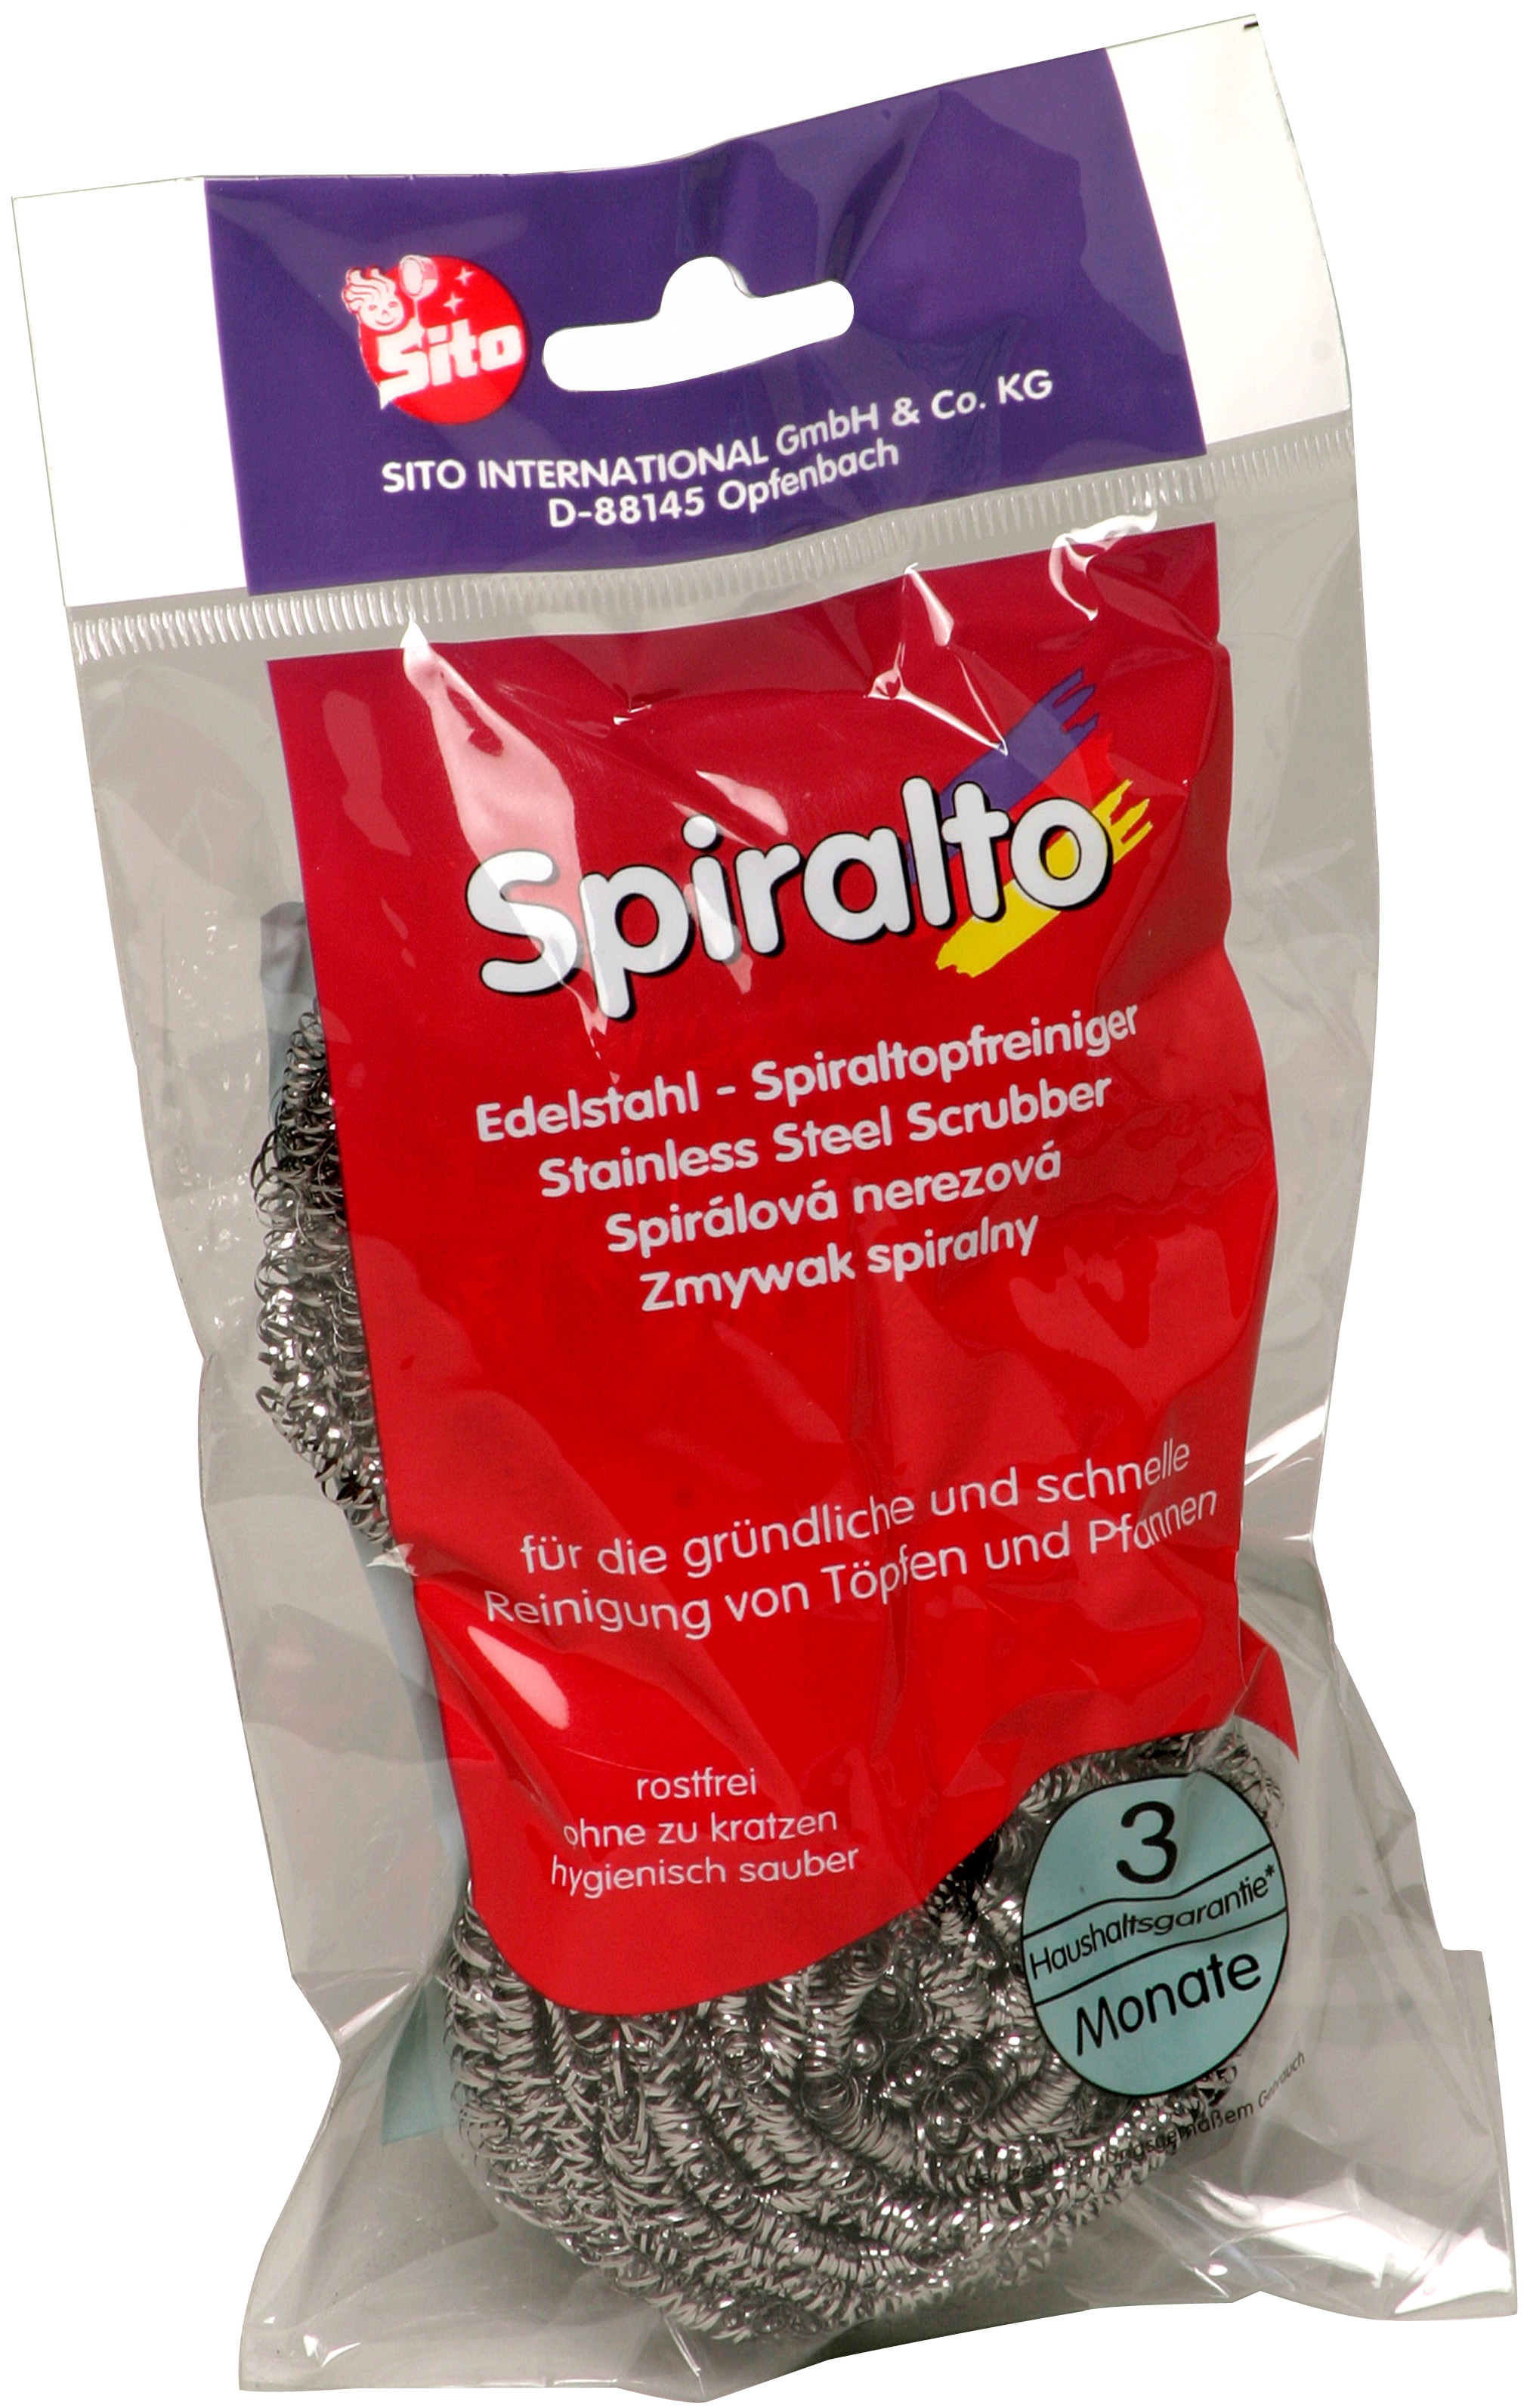 00615 - spiral scouring pads stainless steel, set of 2